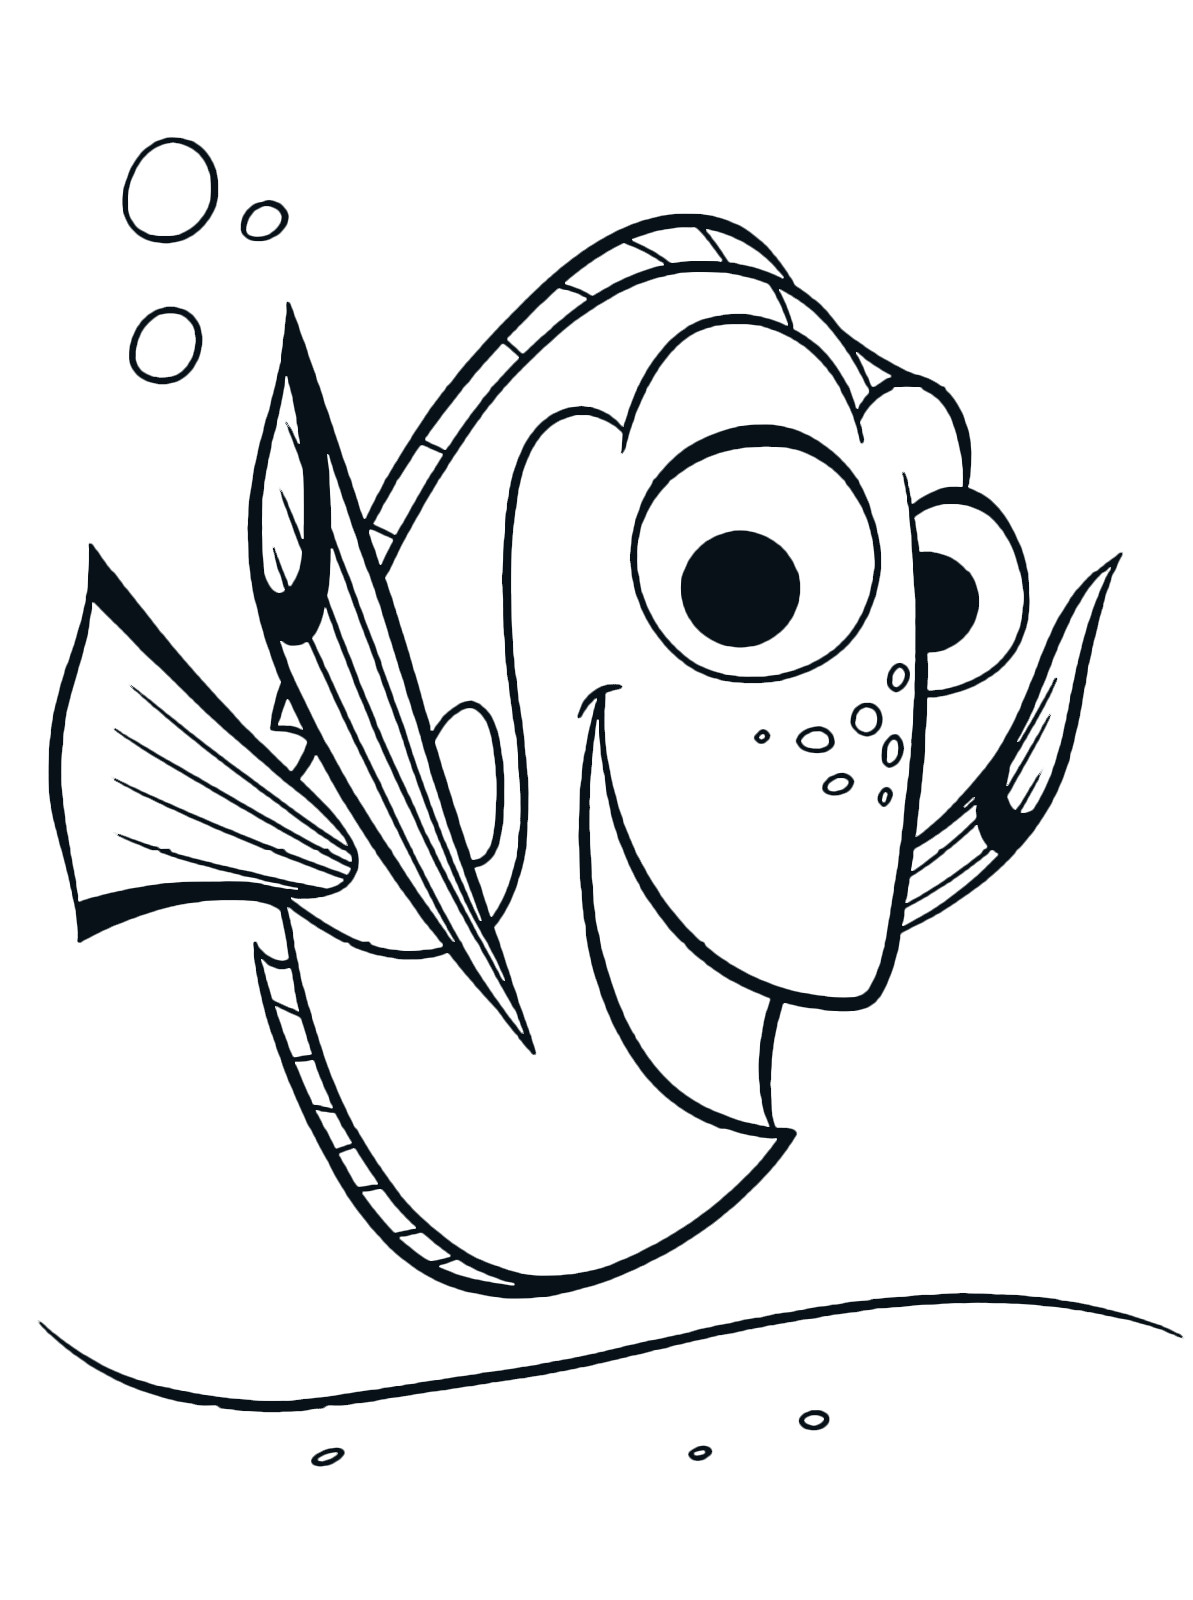 Baby Dory Coloring Page
 "Finding Dory" coloring pages